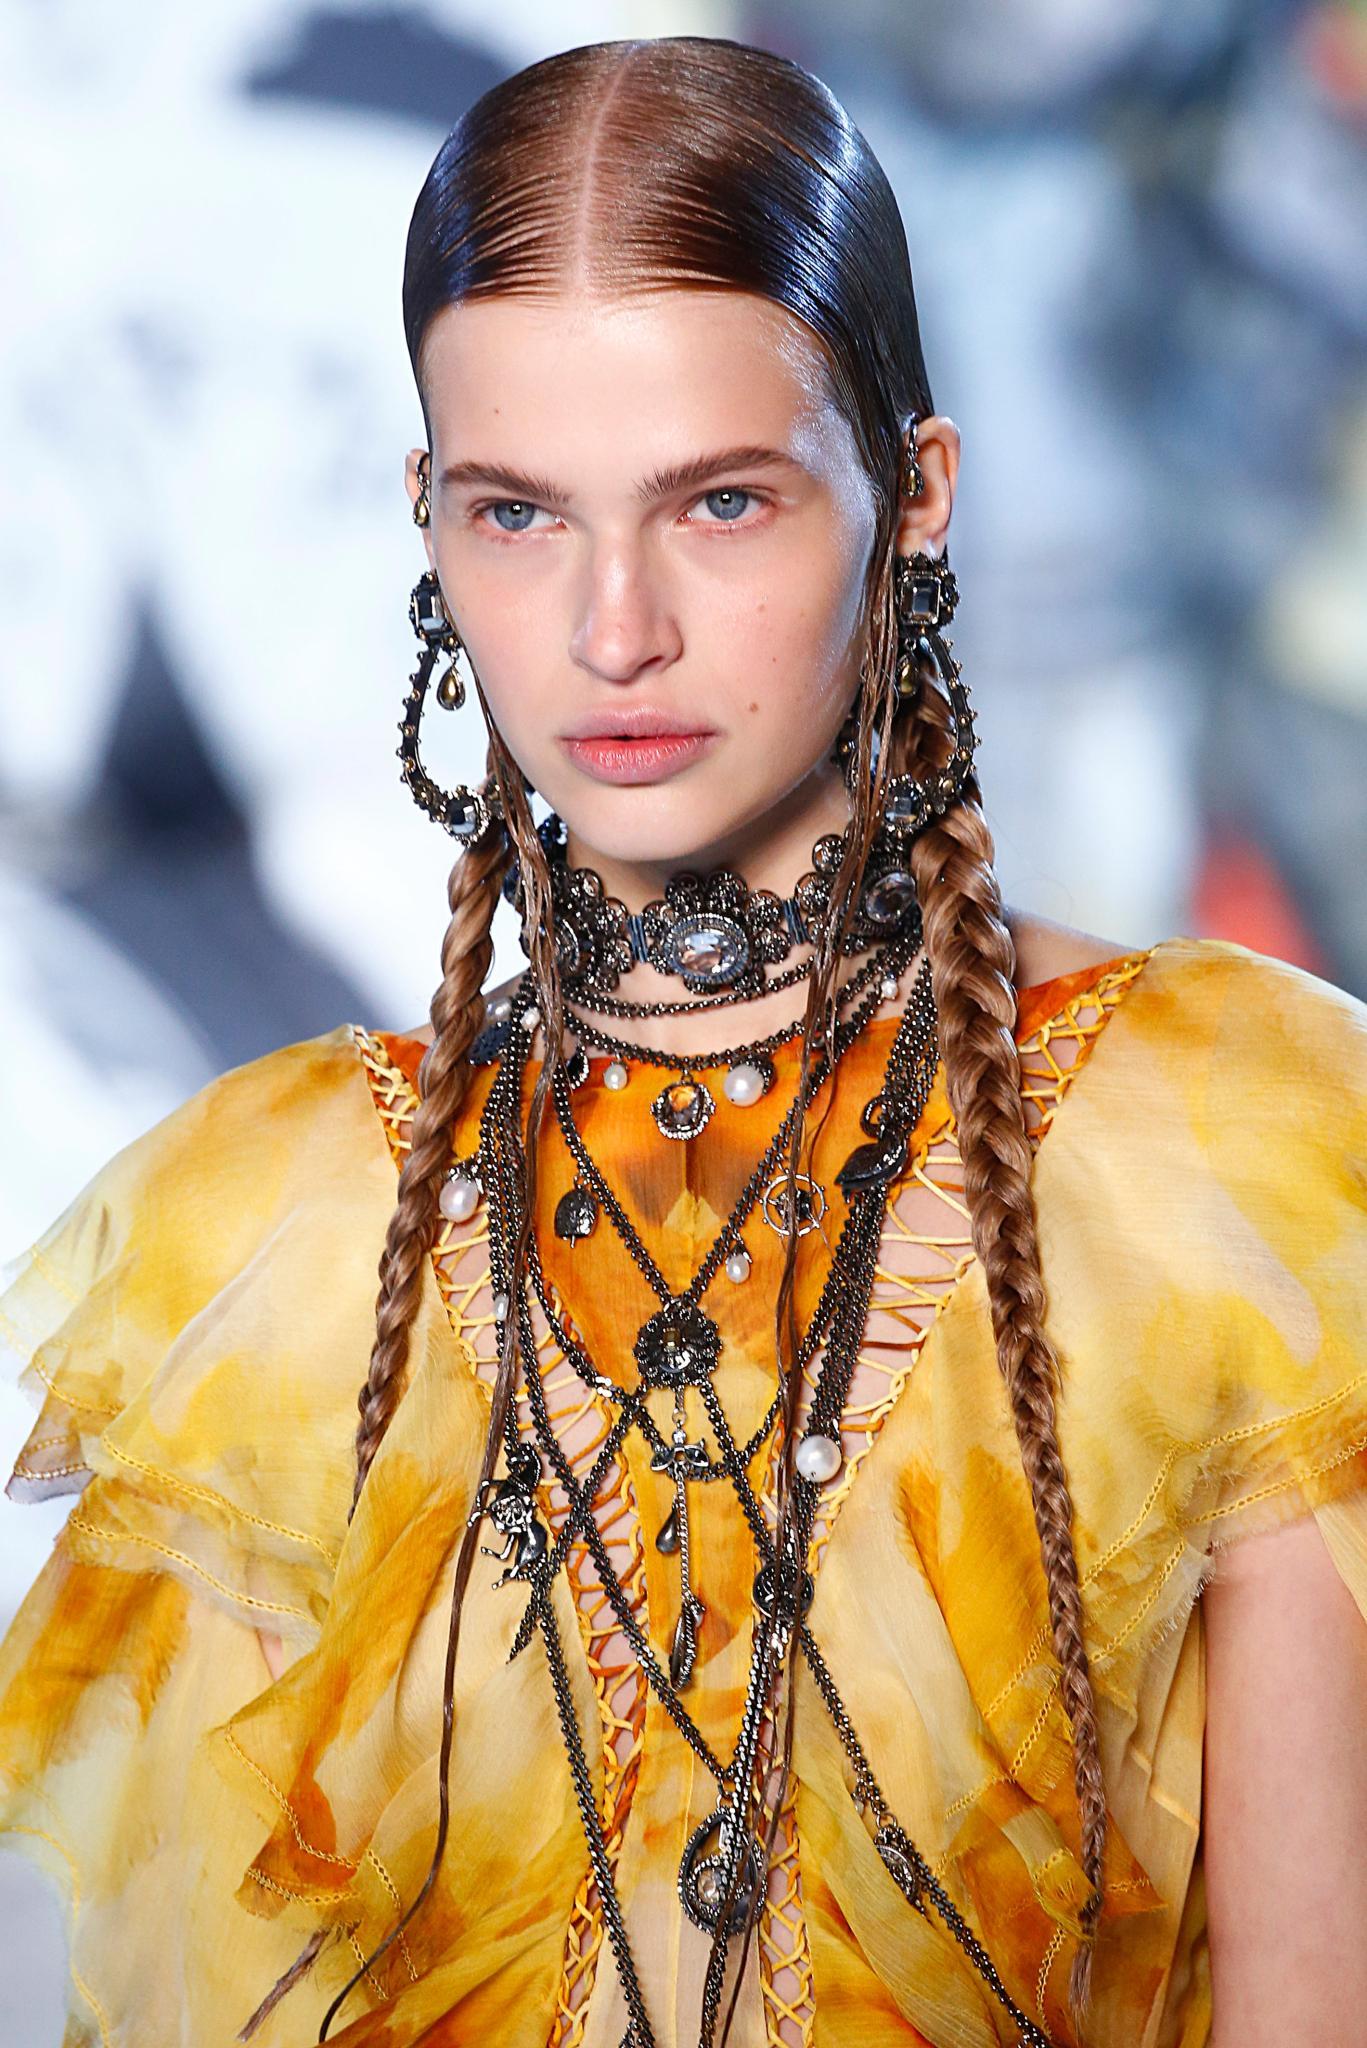 Paris Fashion Week SS19: Close up shot of a model on the Alexander Mcqueen runway with long, dark brown sleek pigtails, wearing yellow jacket with tonnes of jewellery